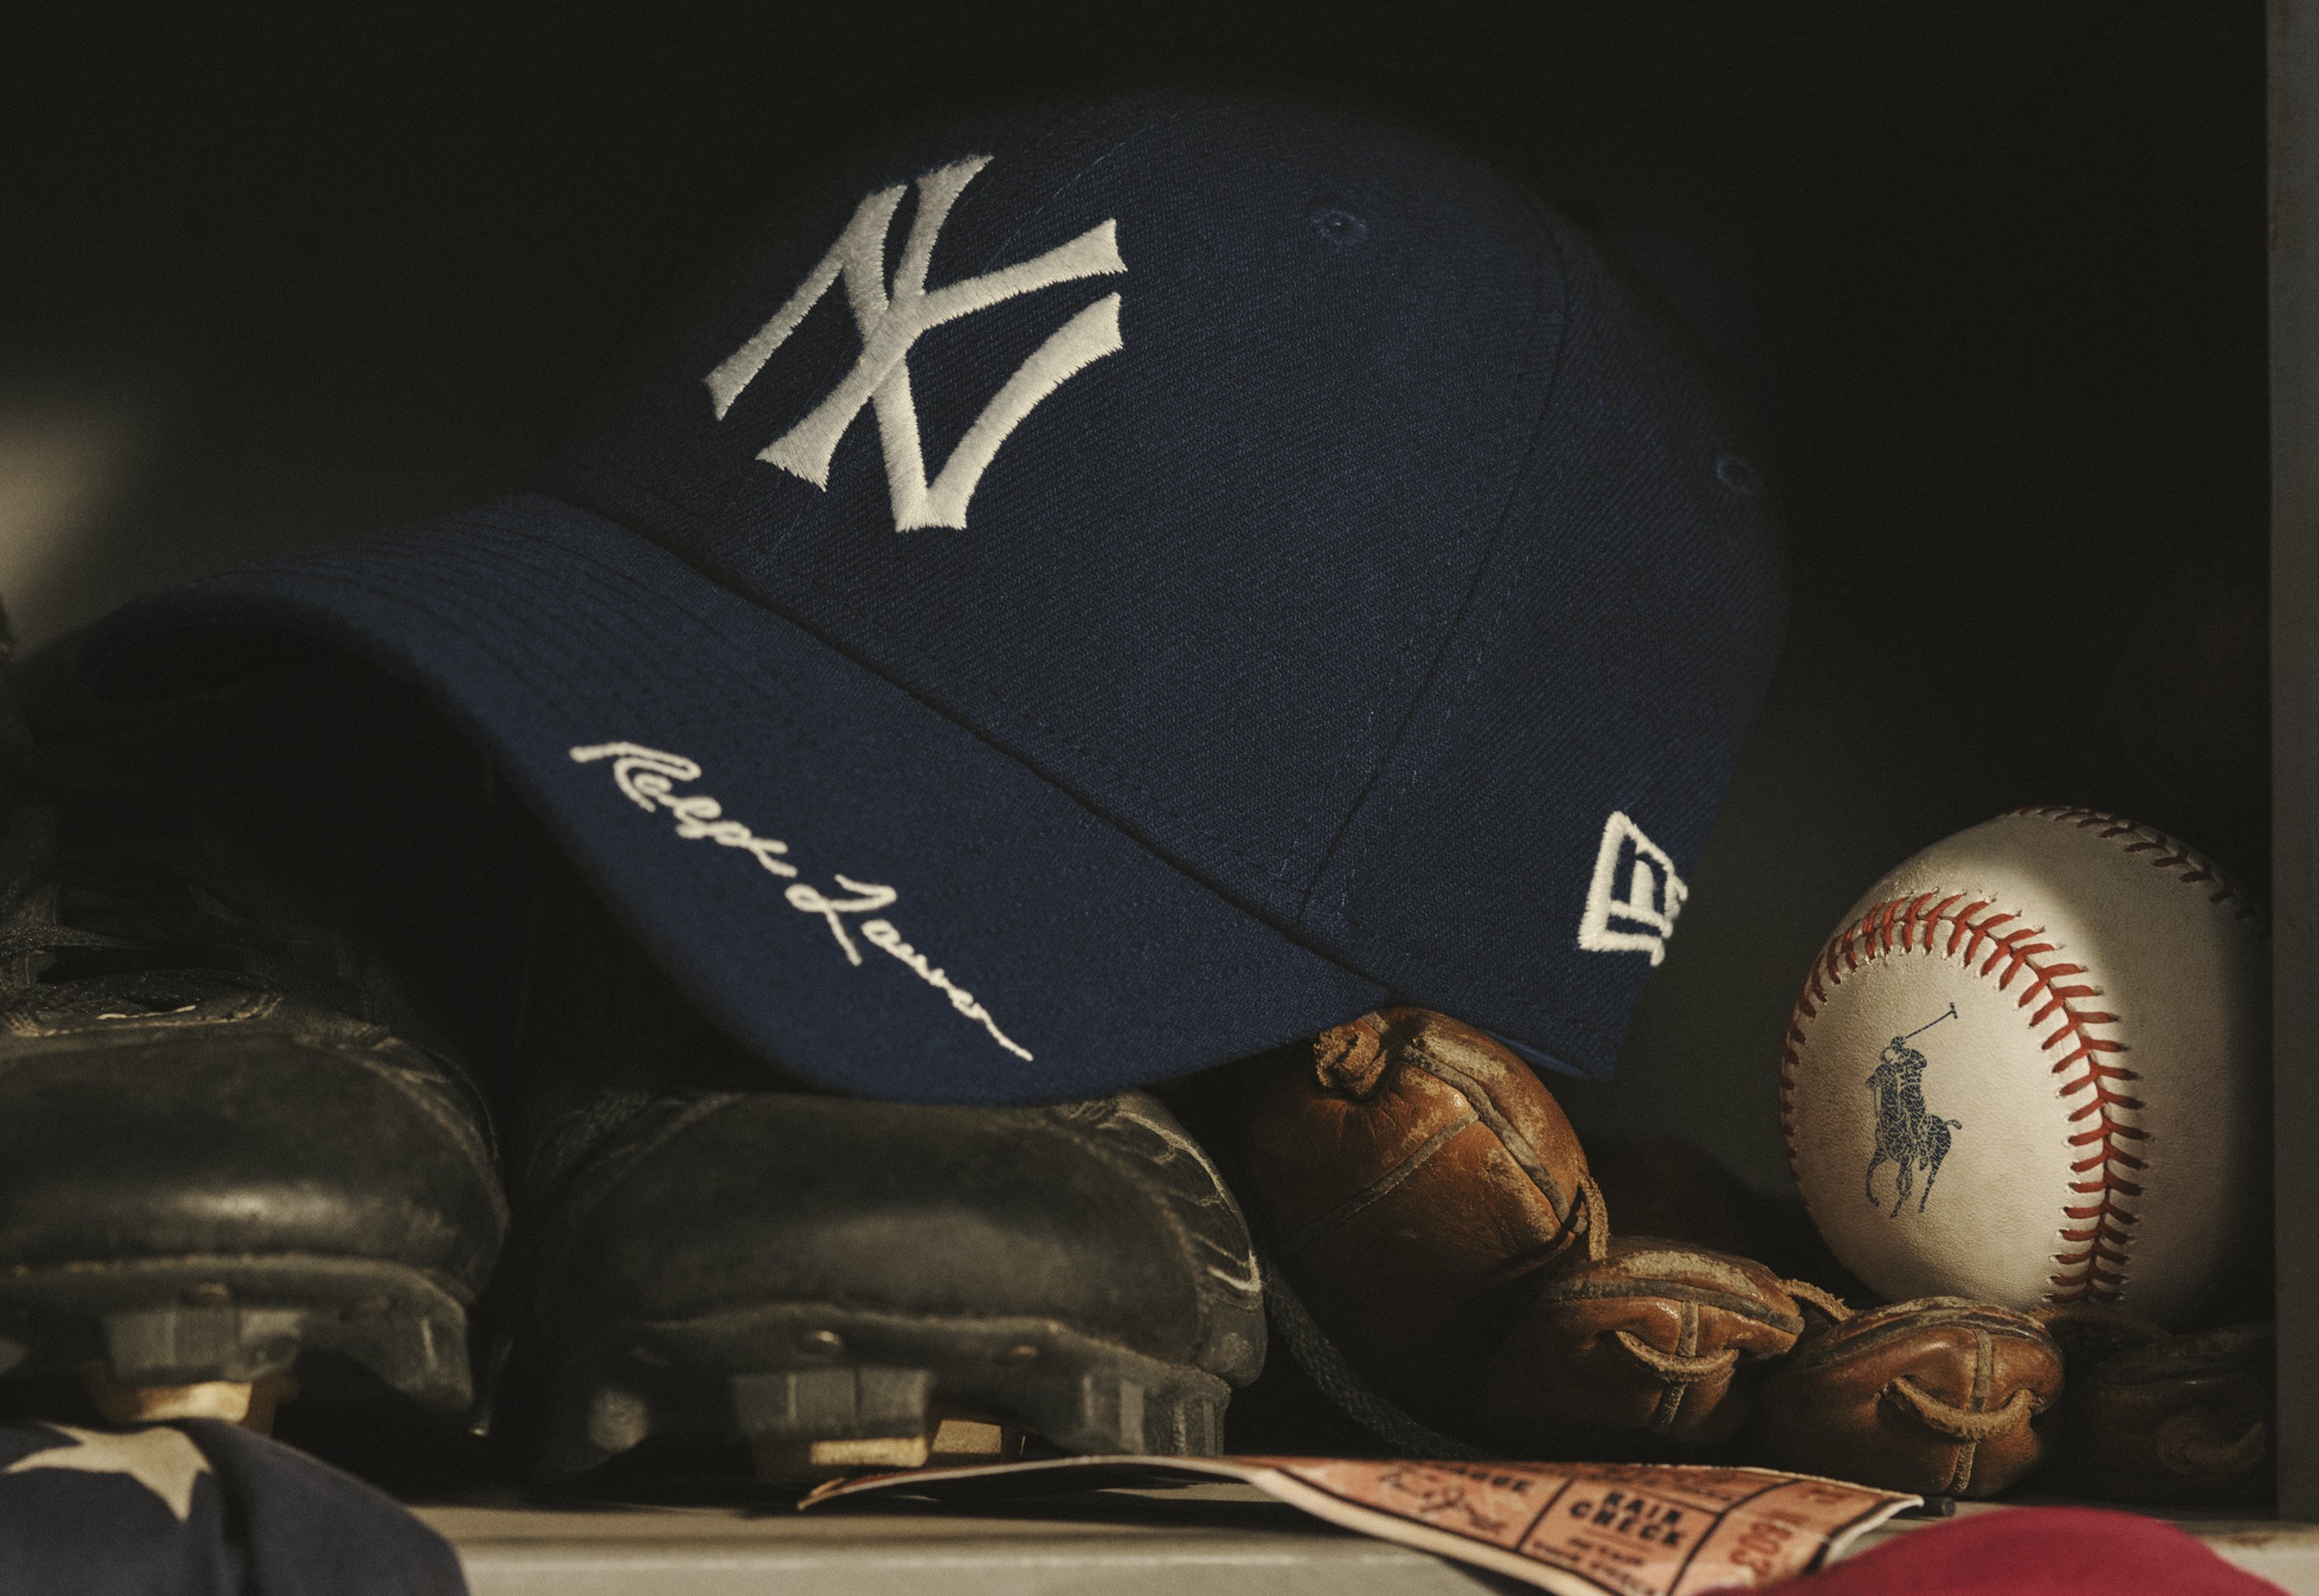 Ralph Lauren Hits a Home Run With Newest MLB Collection